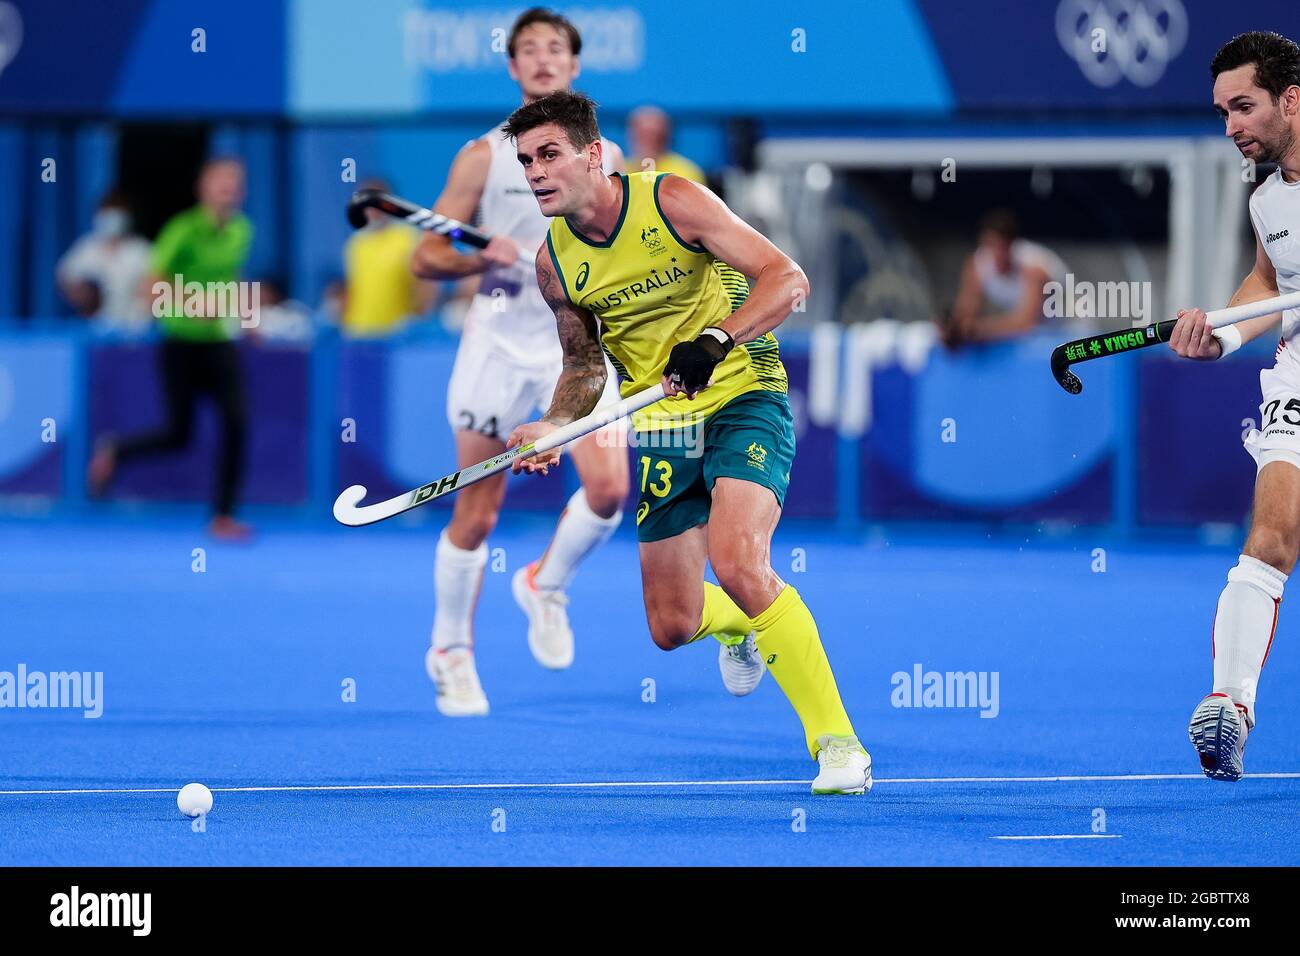 Tokyo, Japan, 5 August, 2021. Blake Govers of Team Australia during the Men's Hockey Gold Medal match between Australia and Belgium on Day 13 of the Tokyo 2020 Olympic Games. Credit: Pete Dovgan/Speed Media/Alamy Live News Stock Photo